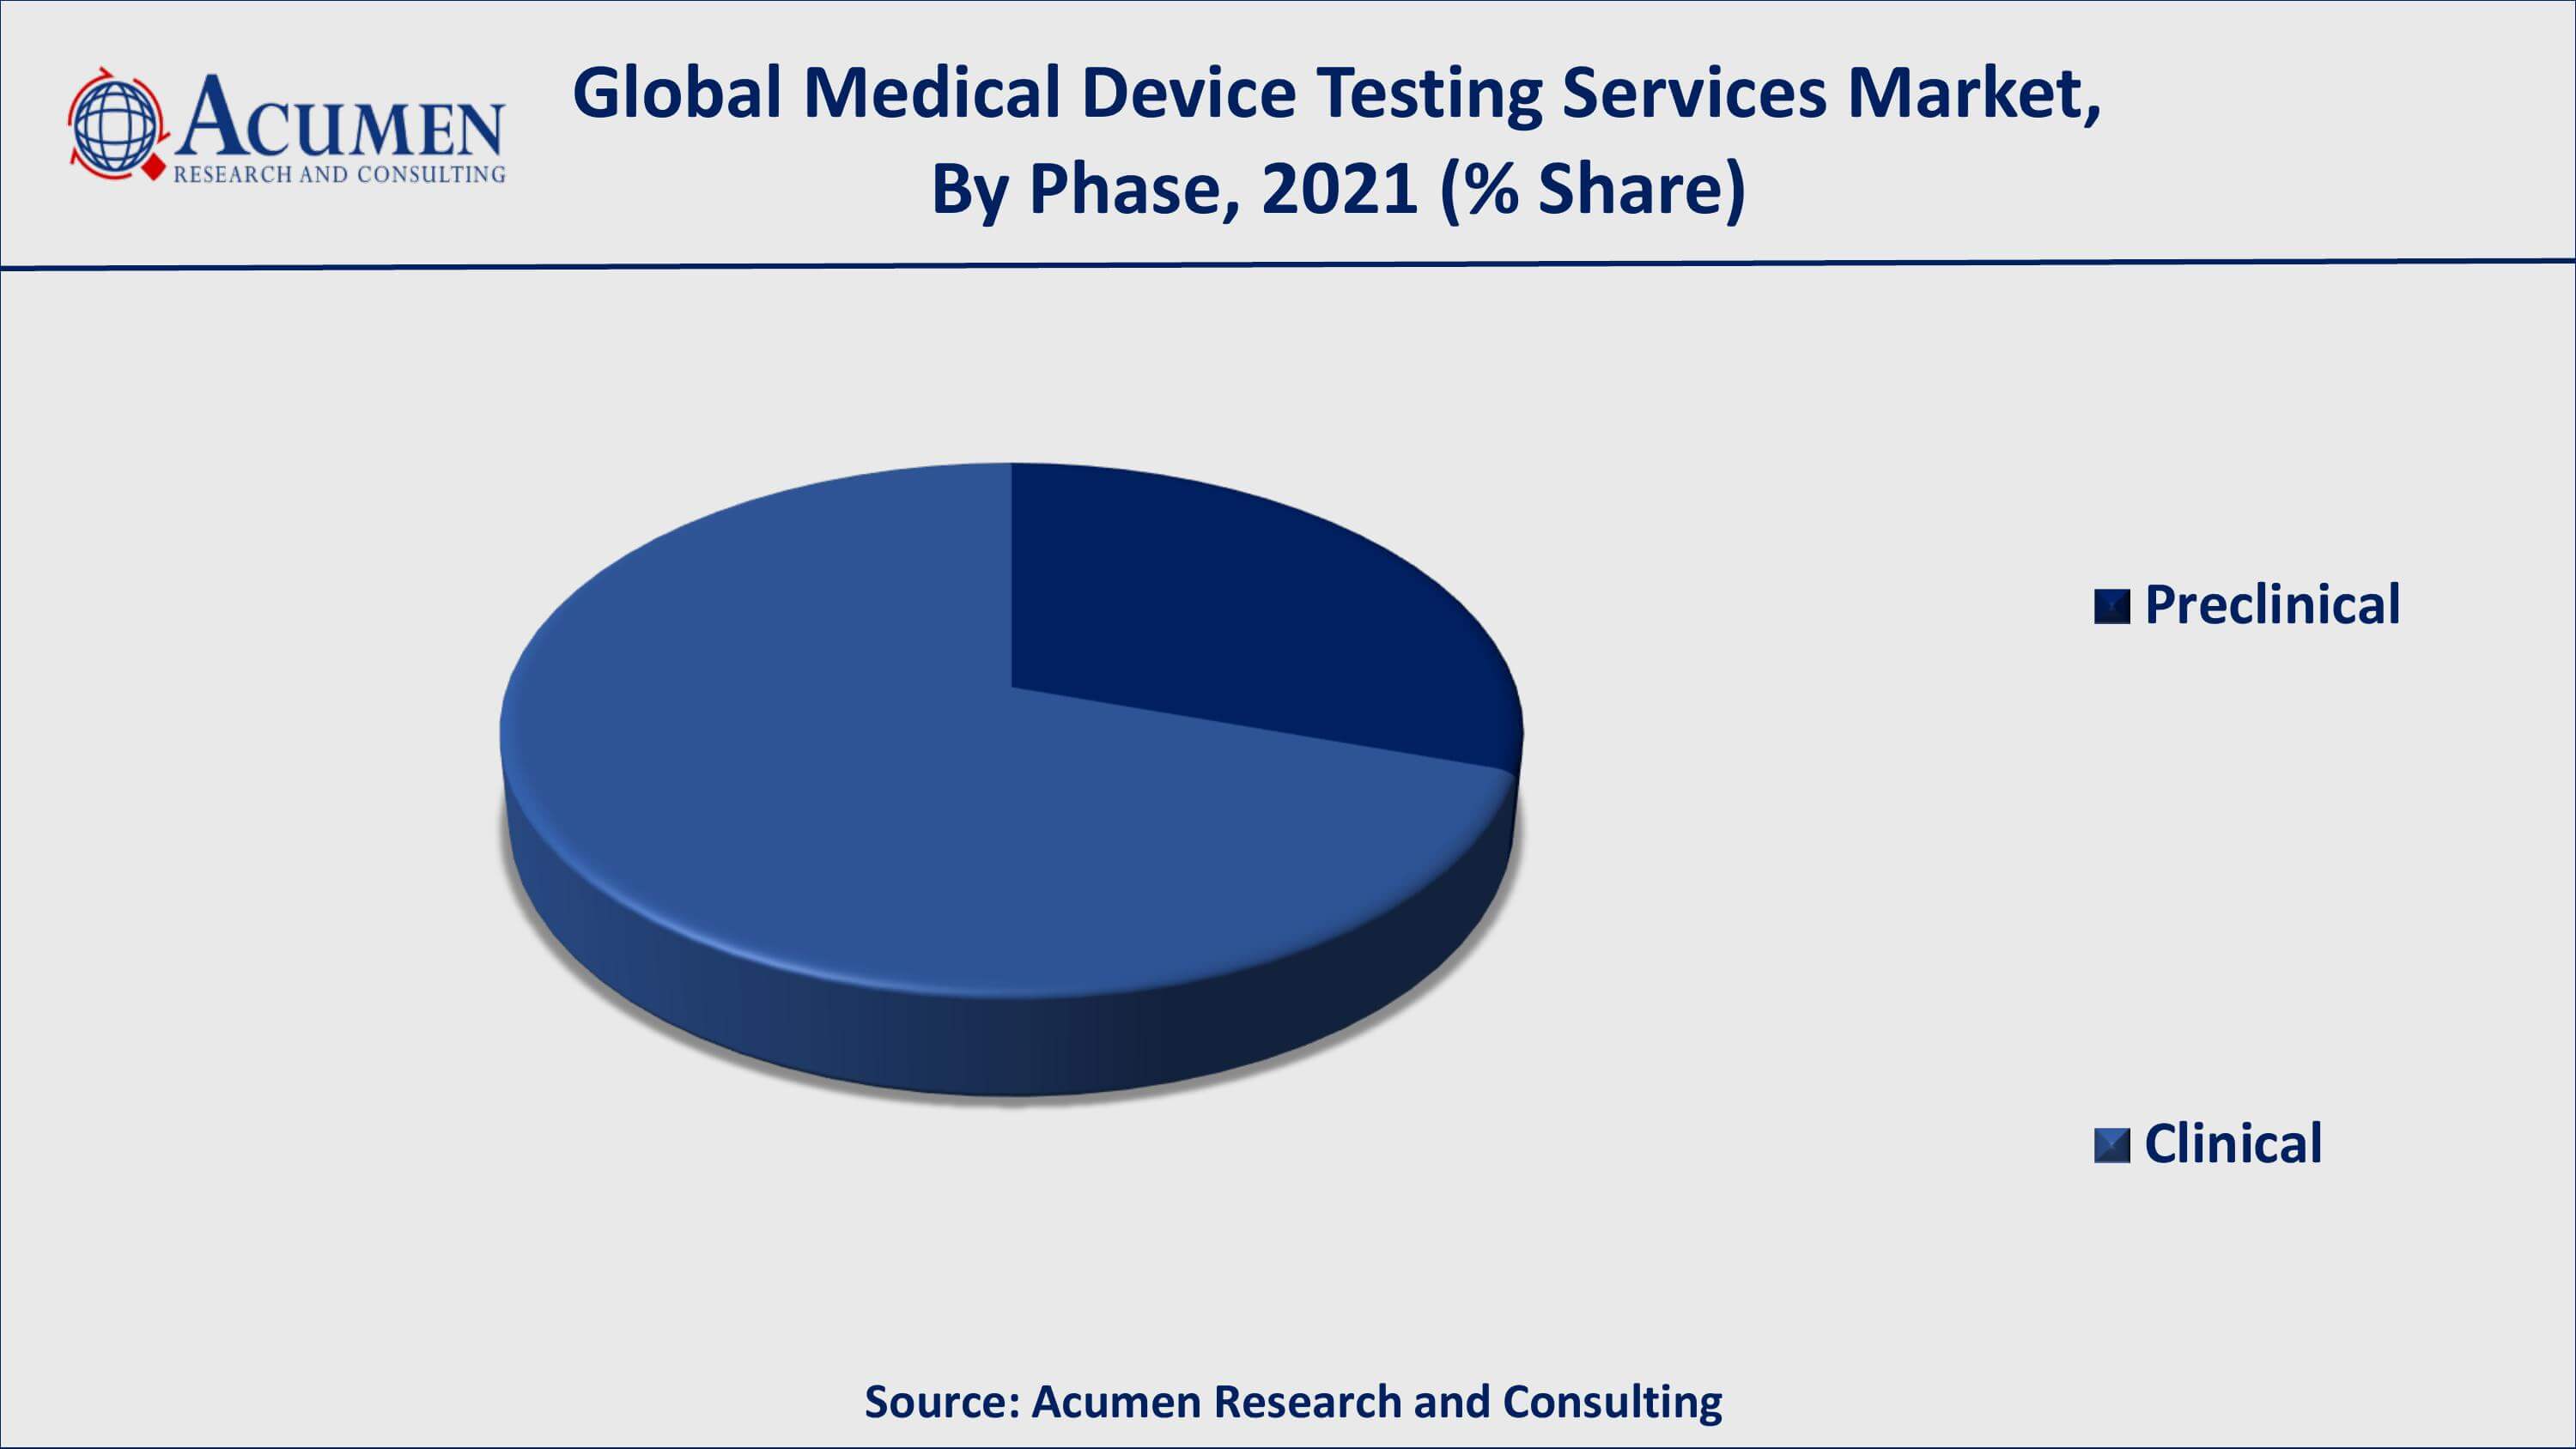 Among phases, clinical occupied more than 69% of the market share from 2022 to 2030